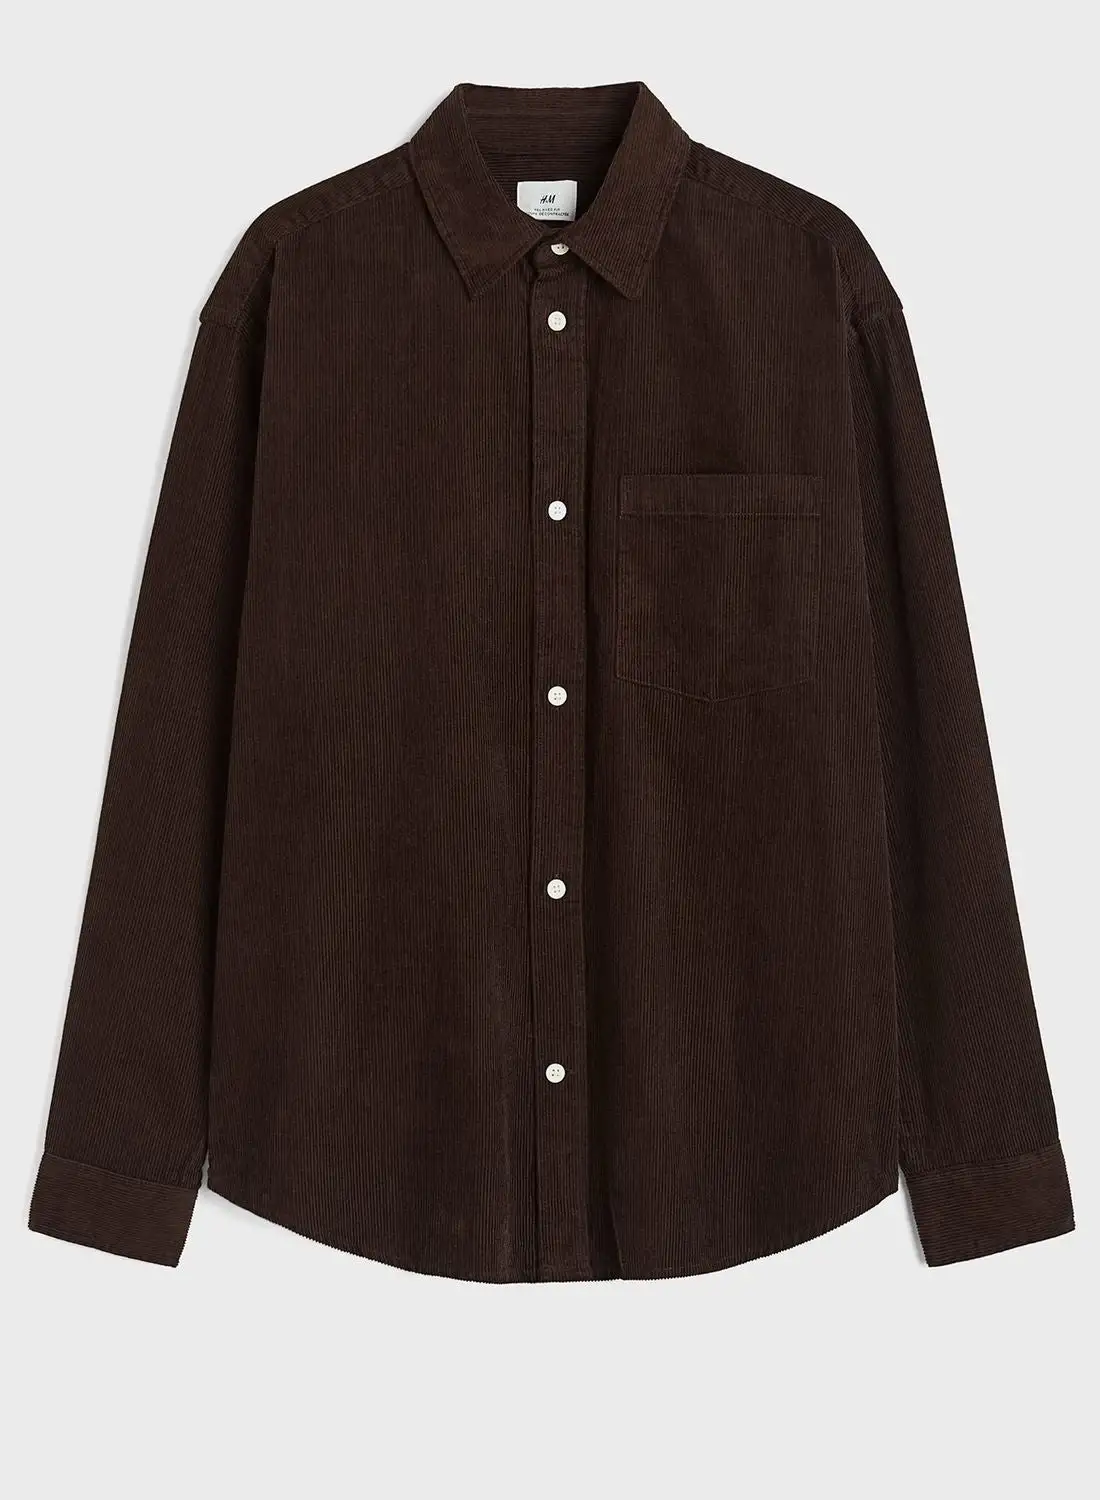 H&M Relaxed Fit Corduroy Shirt